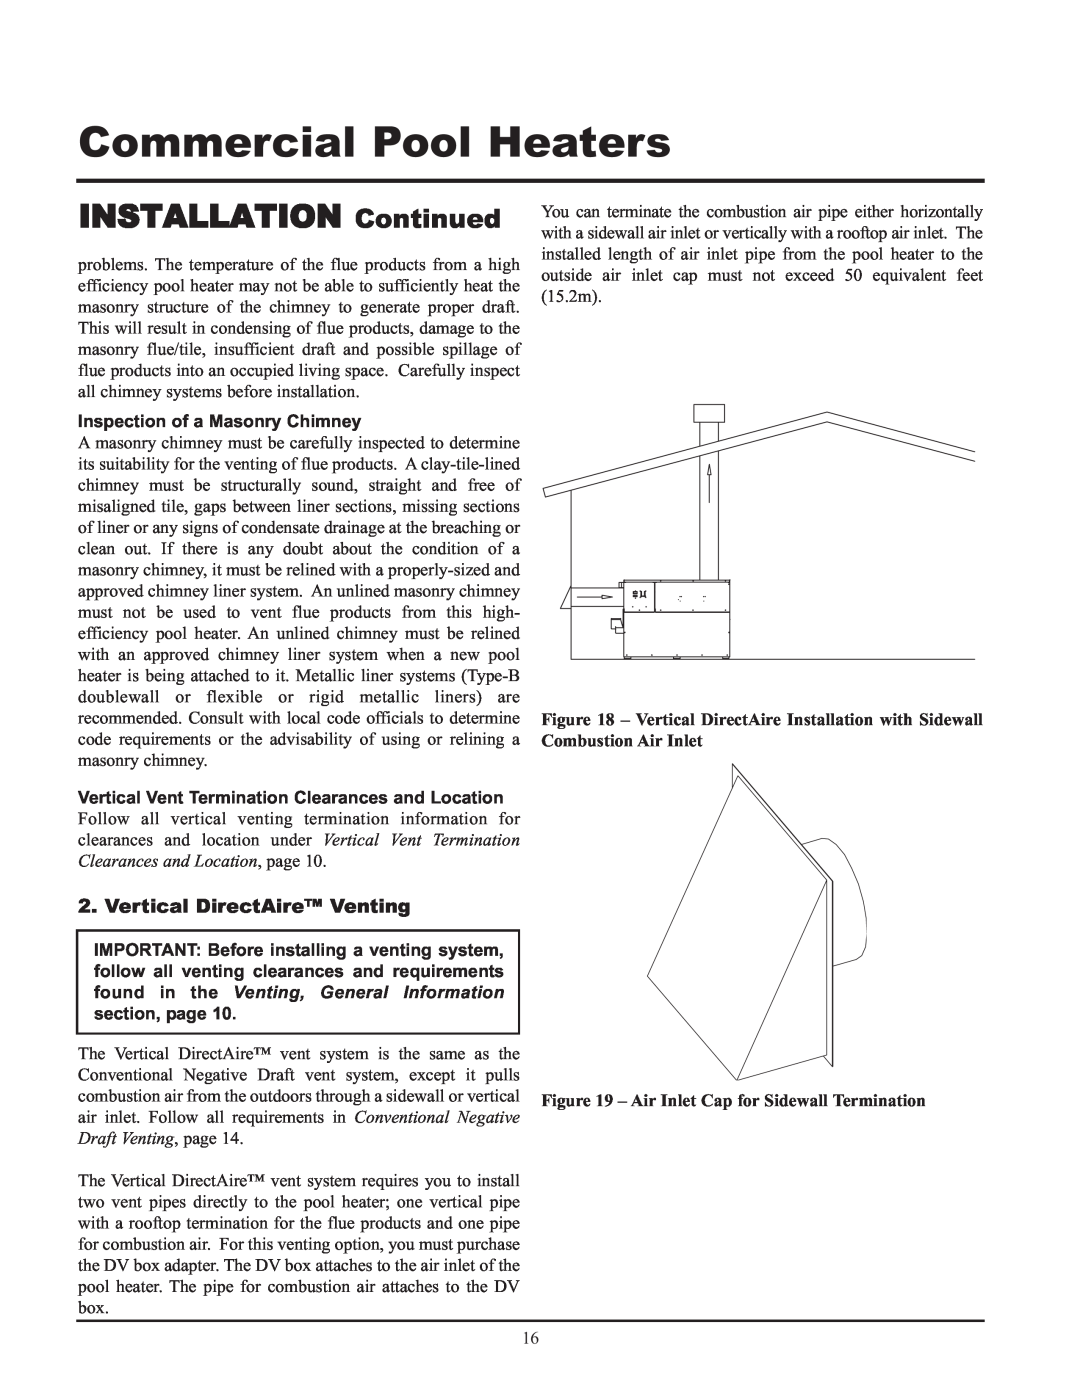 Lochinvar GAS HEATER FOR COMMERICAL POOL APPLICATIONS service manual Vertical DirectAire Venting, Draft Venting, page 